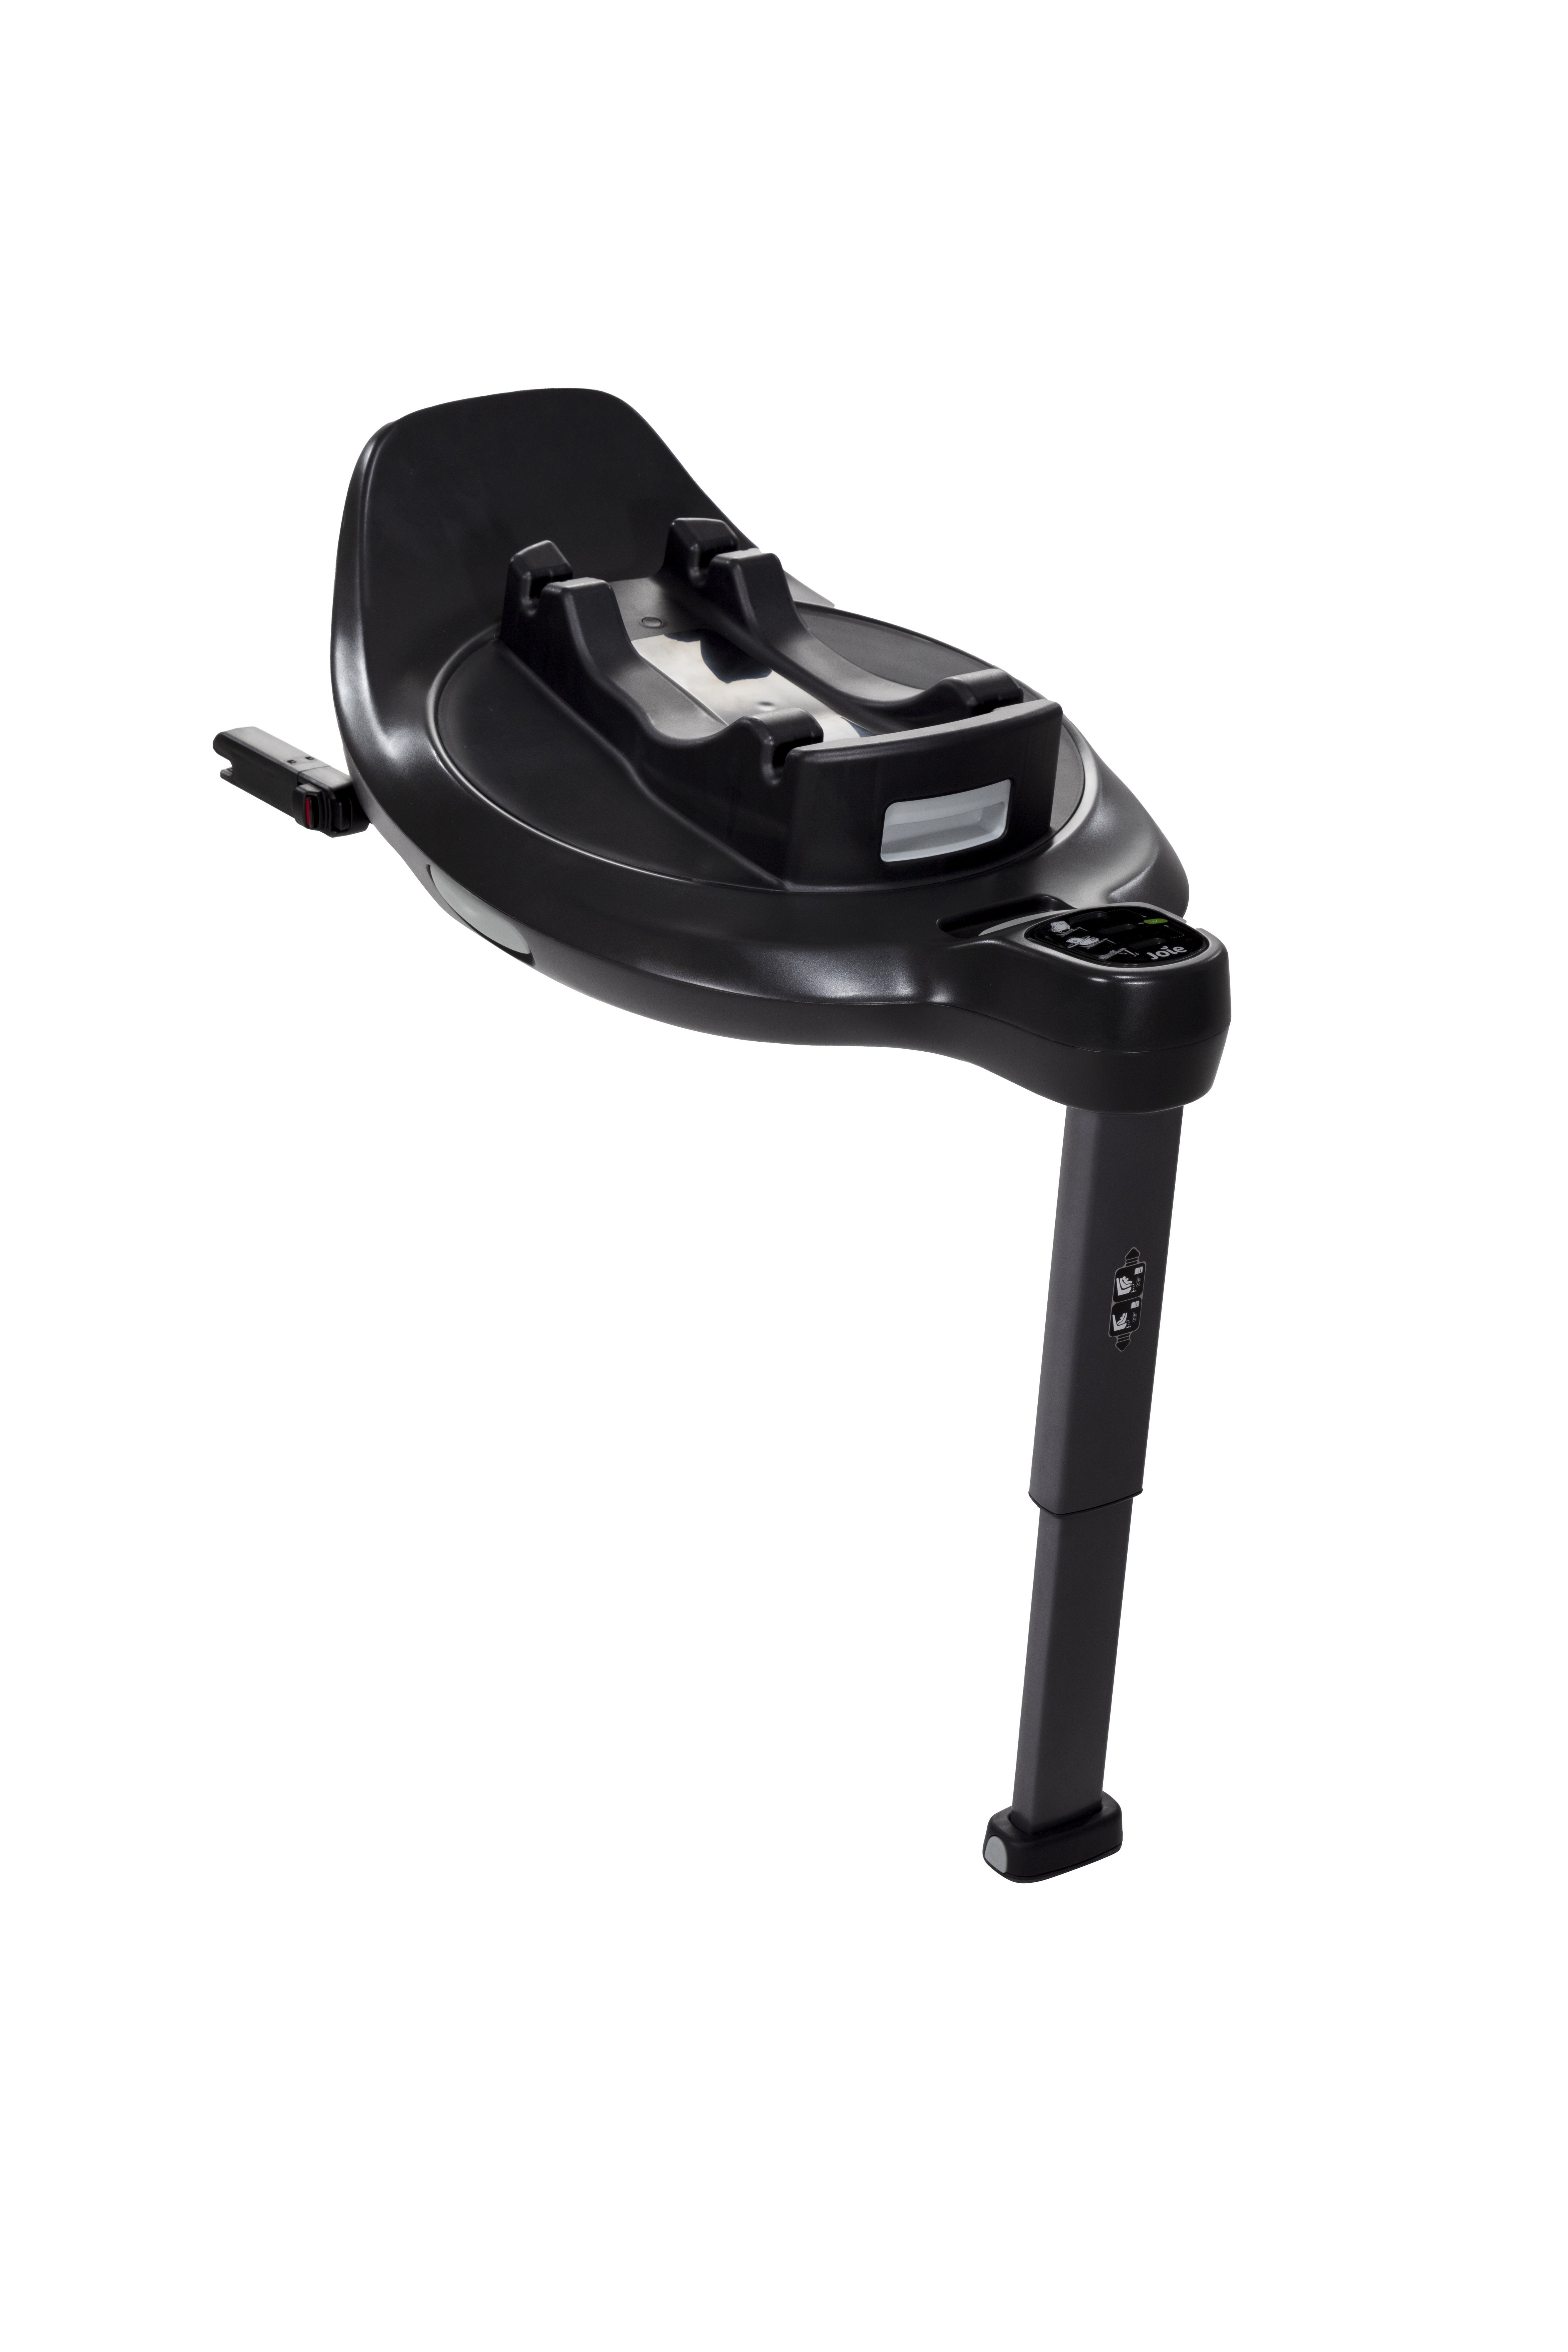 Joie spin 360™ GT  Group 0+/1 Spinning Car Seat for Newborns to